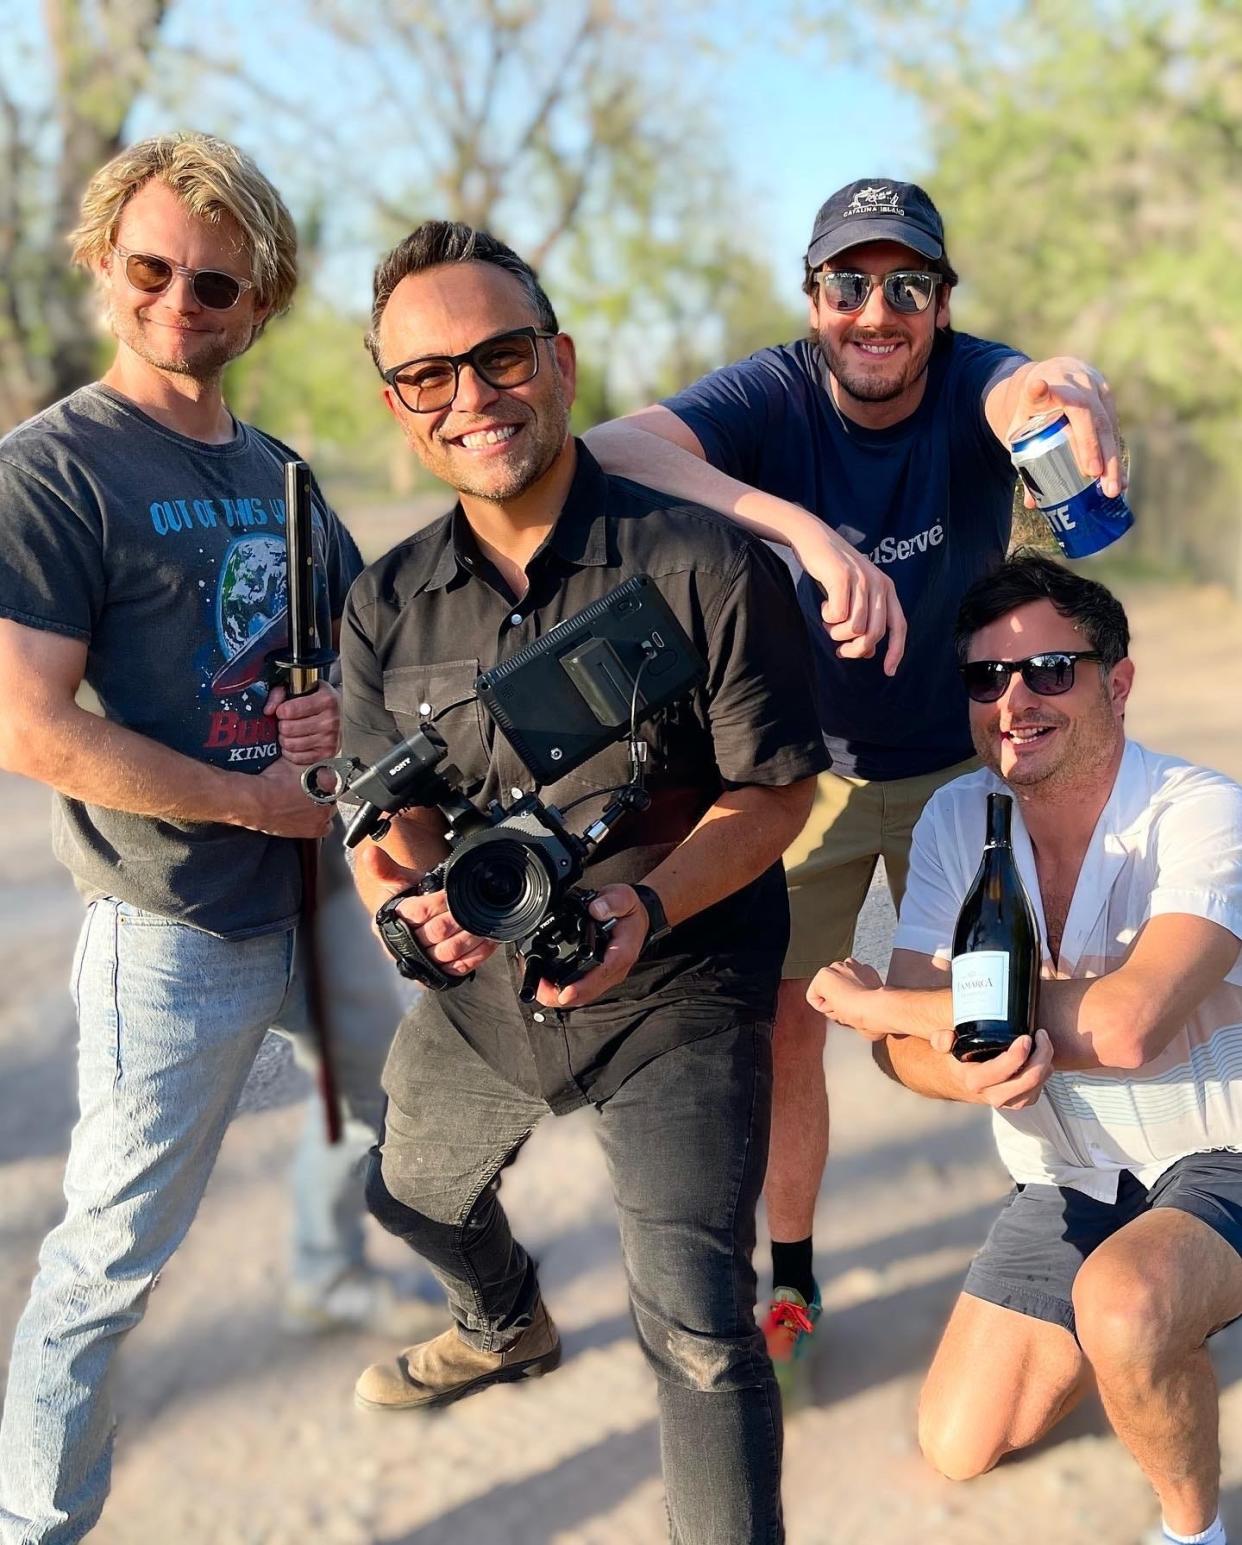 Channel 14-KFOX news anchor and filmmaker Robert Holguin, center, won two awards at the El Paso Film Festival 2023 for his film, "Blood, Sweat and Beers." Holguin credits the festival for the documentary being included in The Popcorn List.